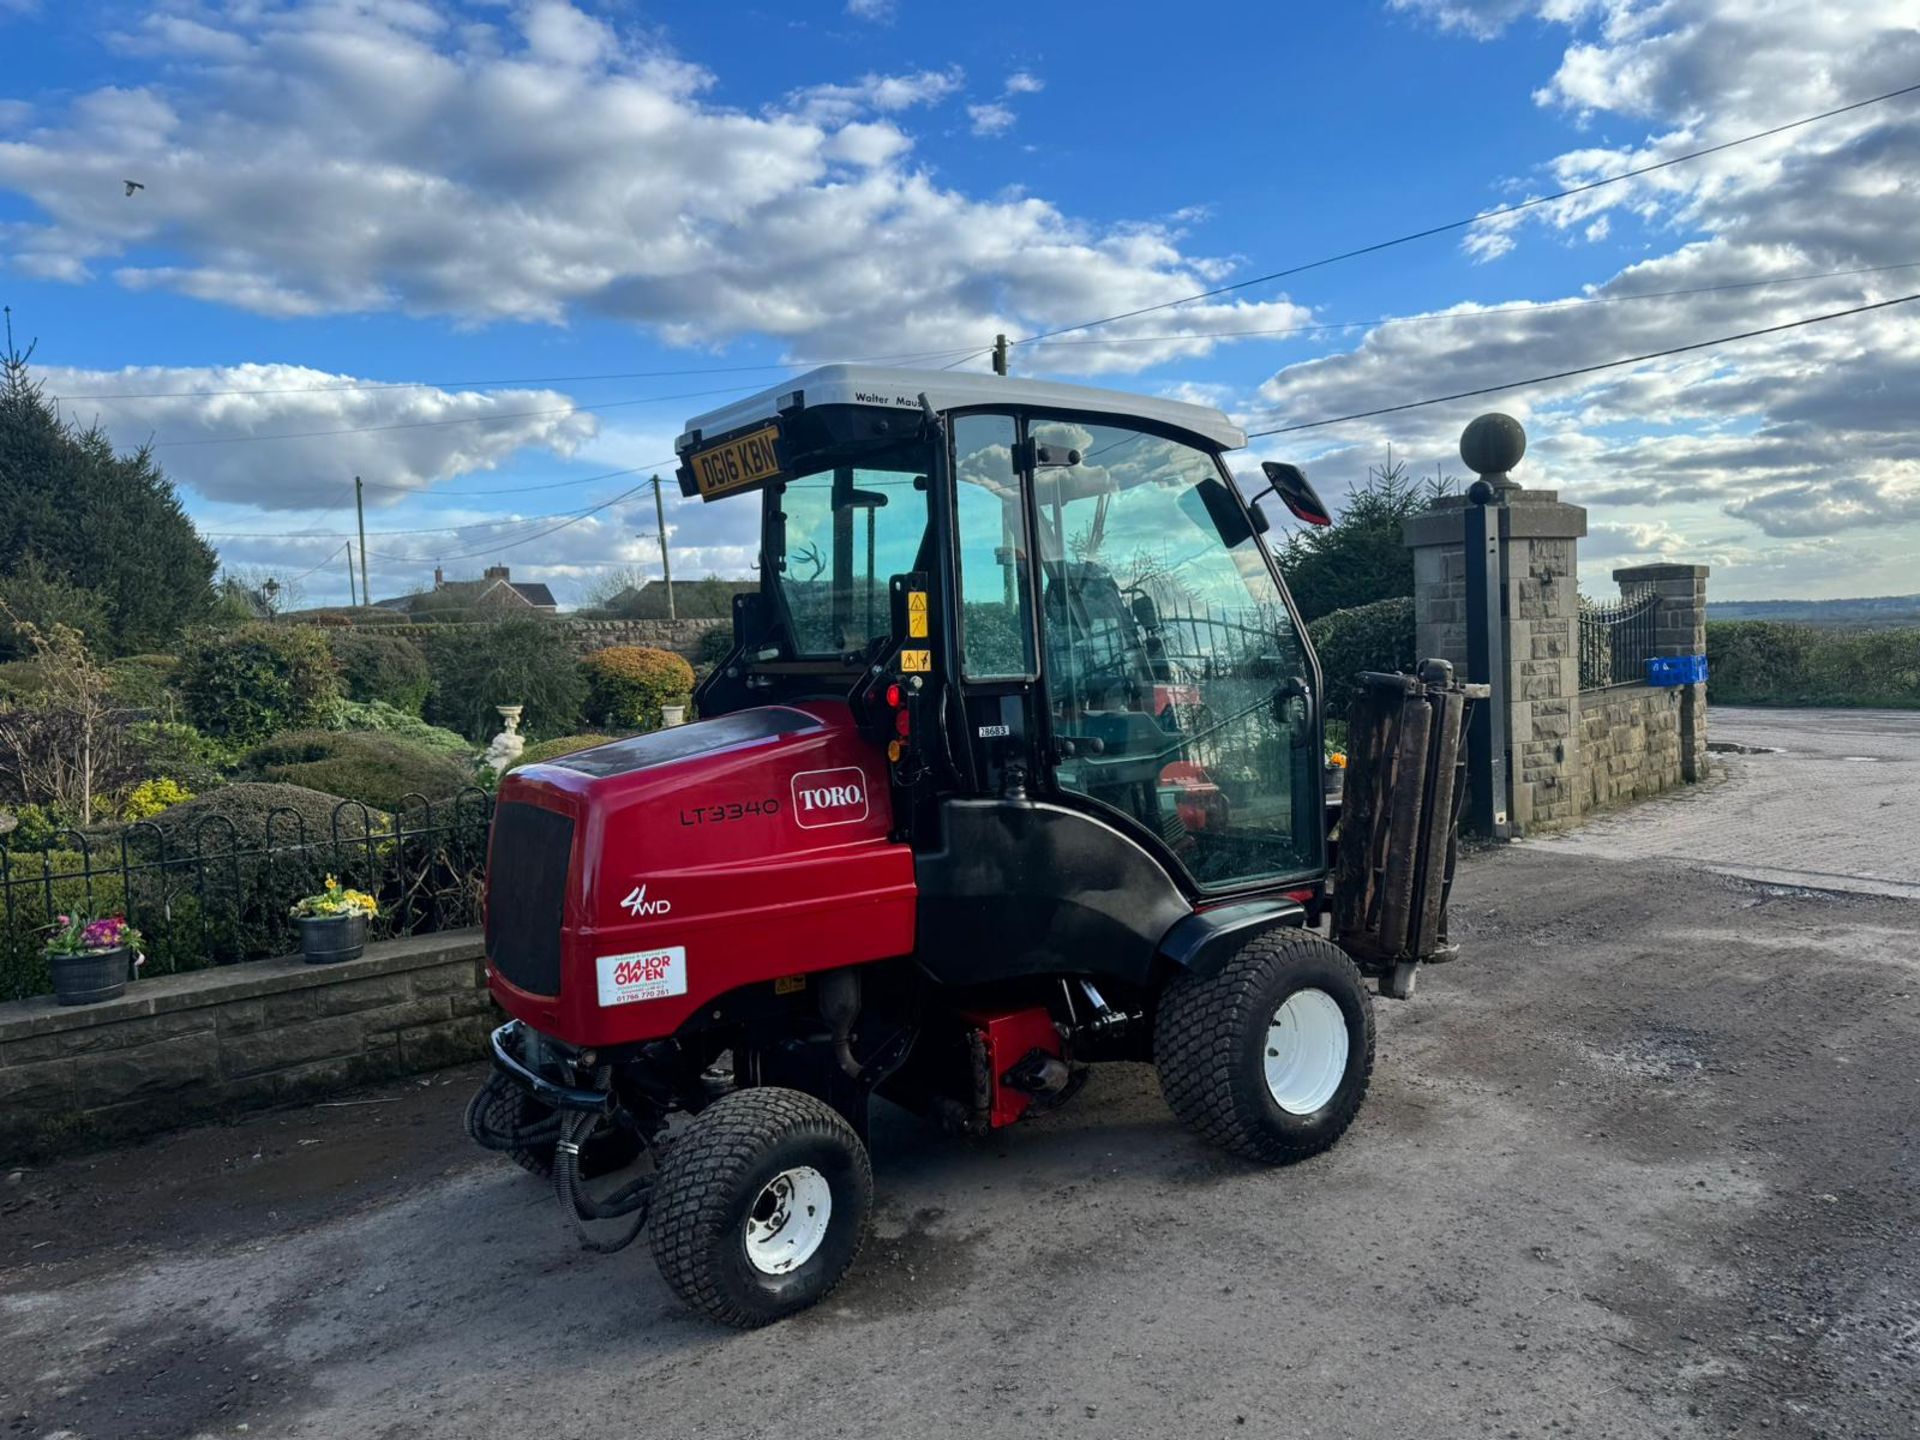 2016 TORO LT3340 4WD 3 GANG RIDE ON CYLINDER MOWER WITH CAB AND AIR CON *PLUS VAT* - Image 10 of 19